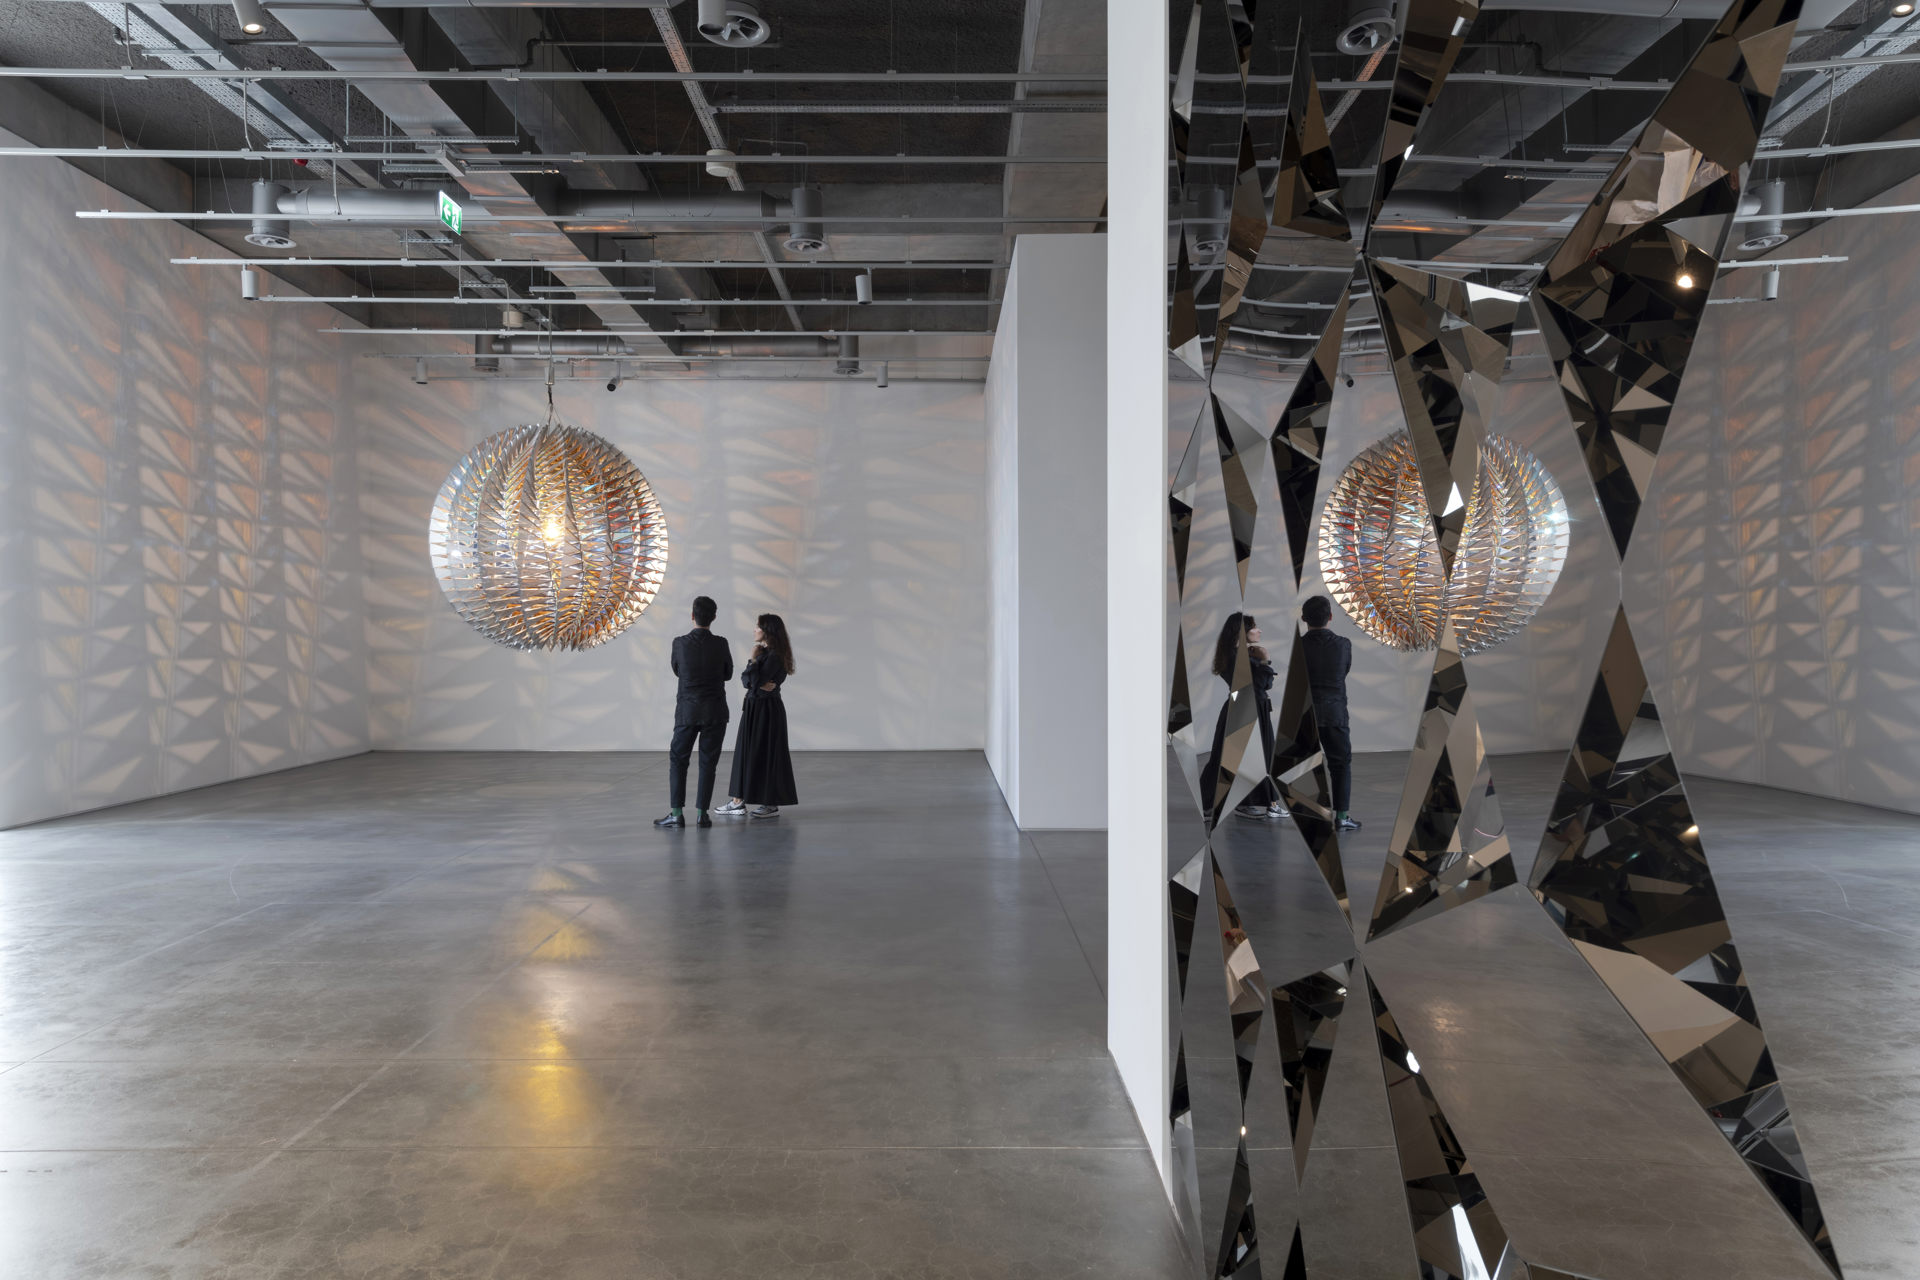 Olafur Eliasson is at Istanbul Modern with “Your unexpected encounter”